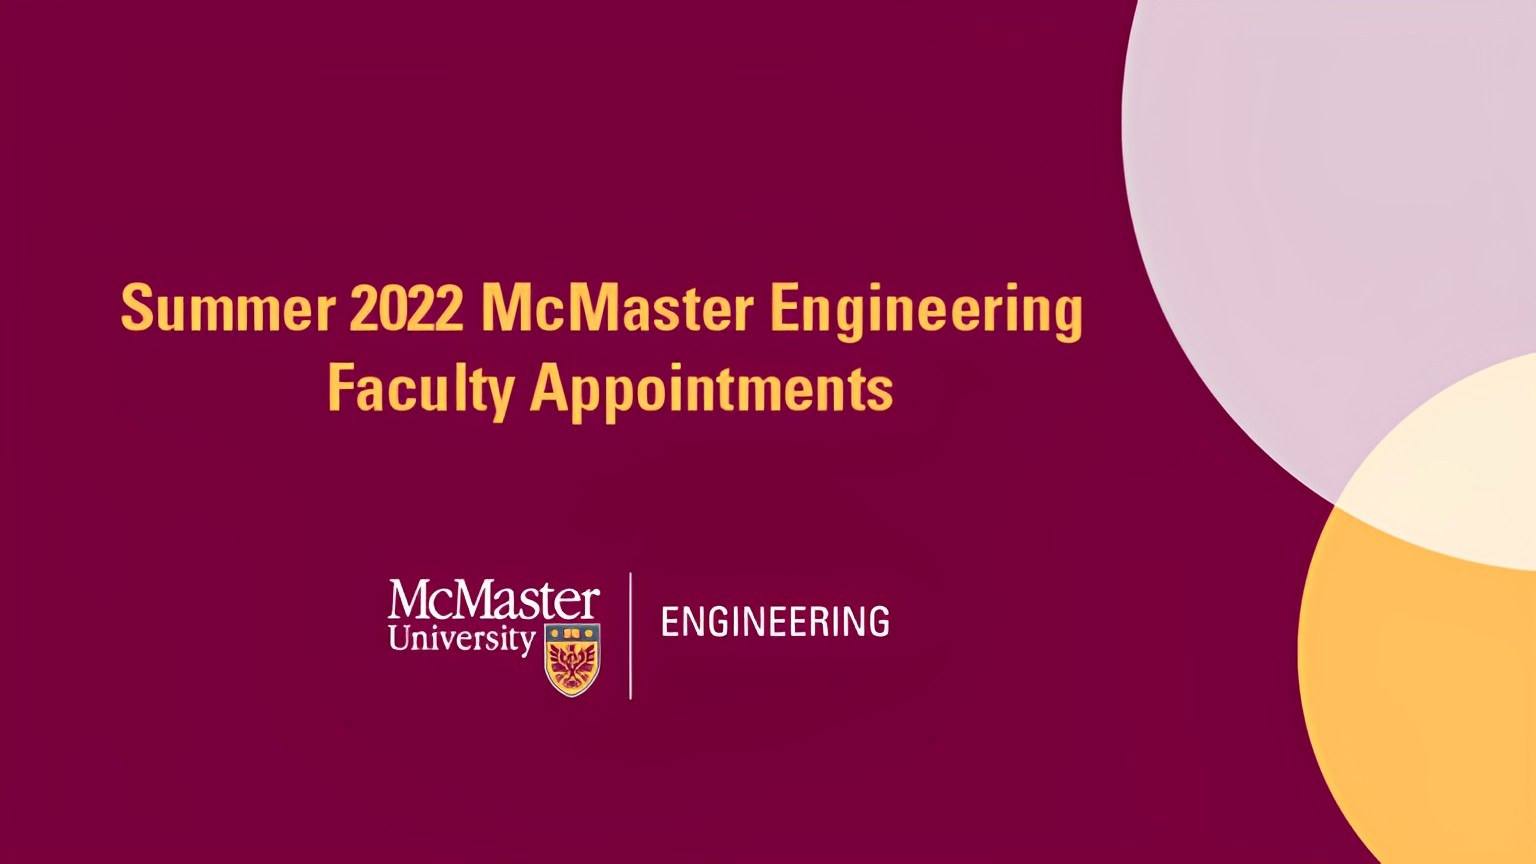 Summer 2022 McMaster Engineering Faculty Appointments graphic